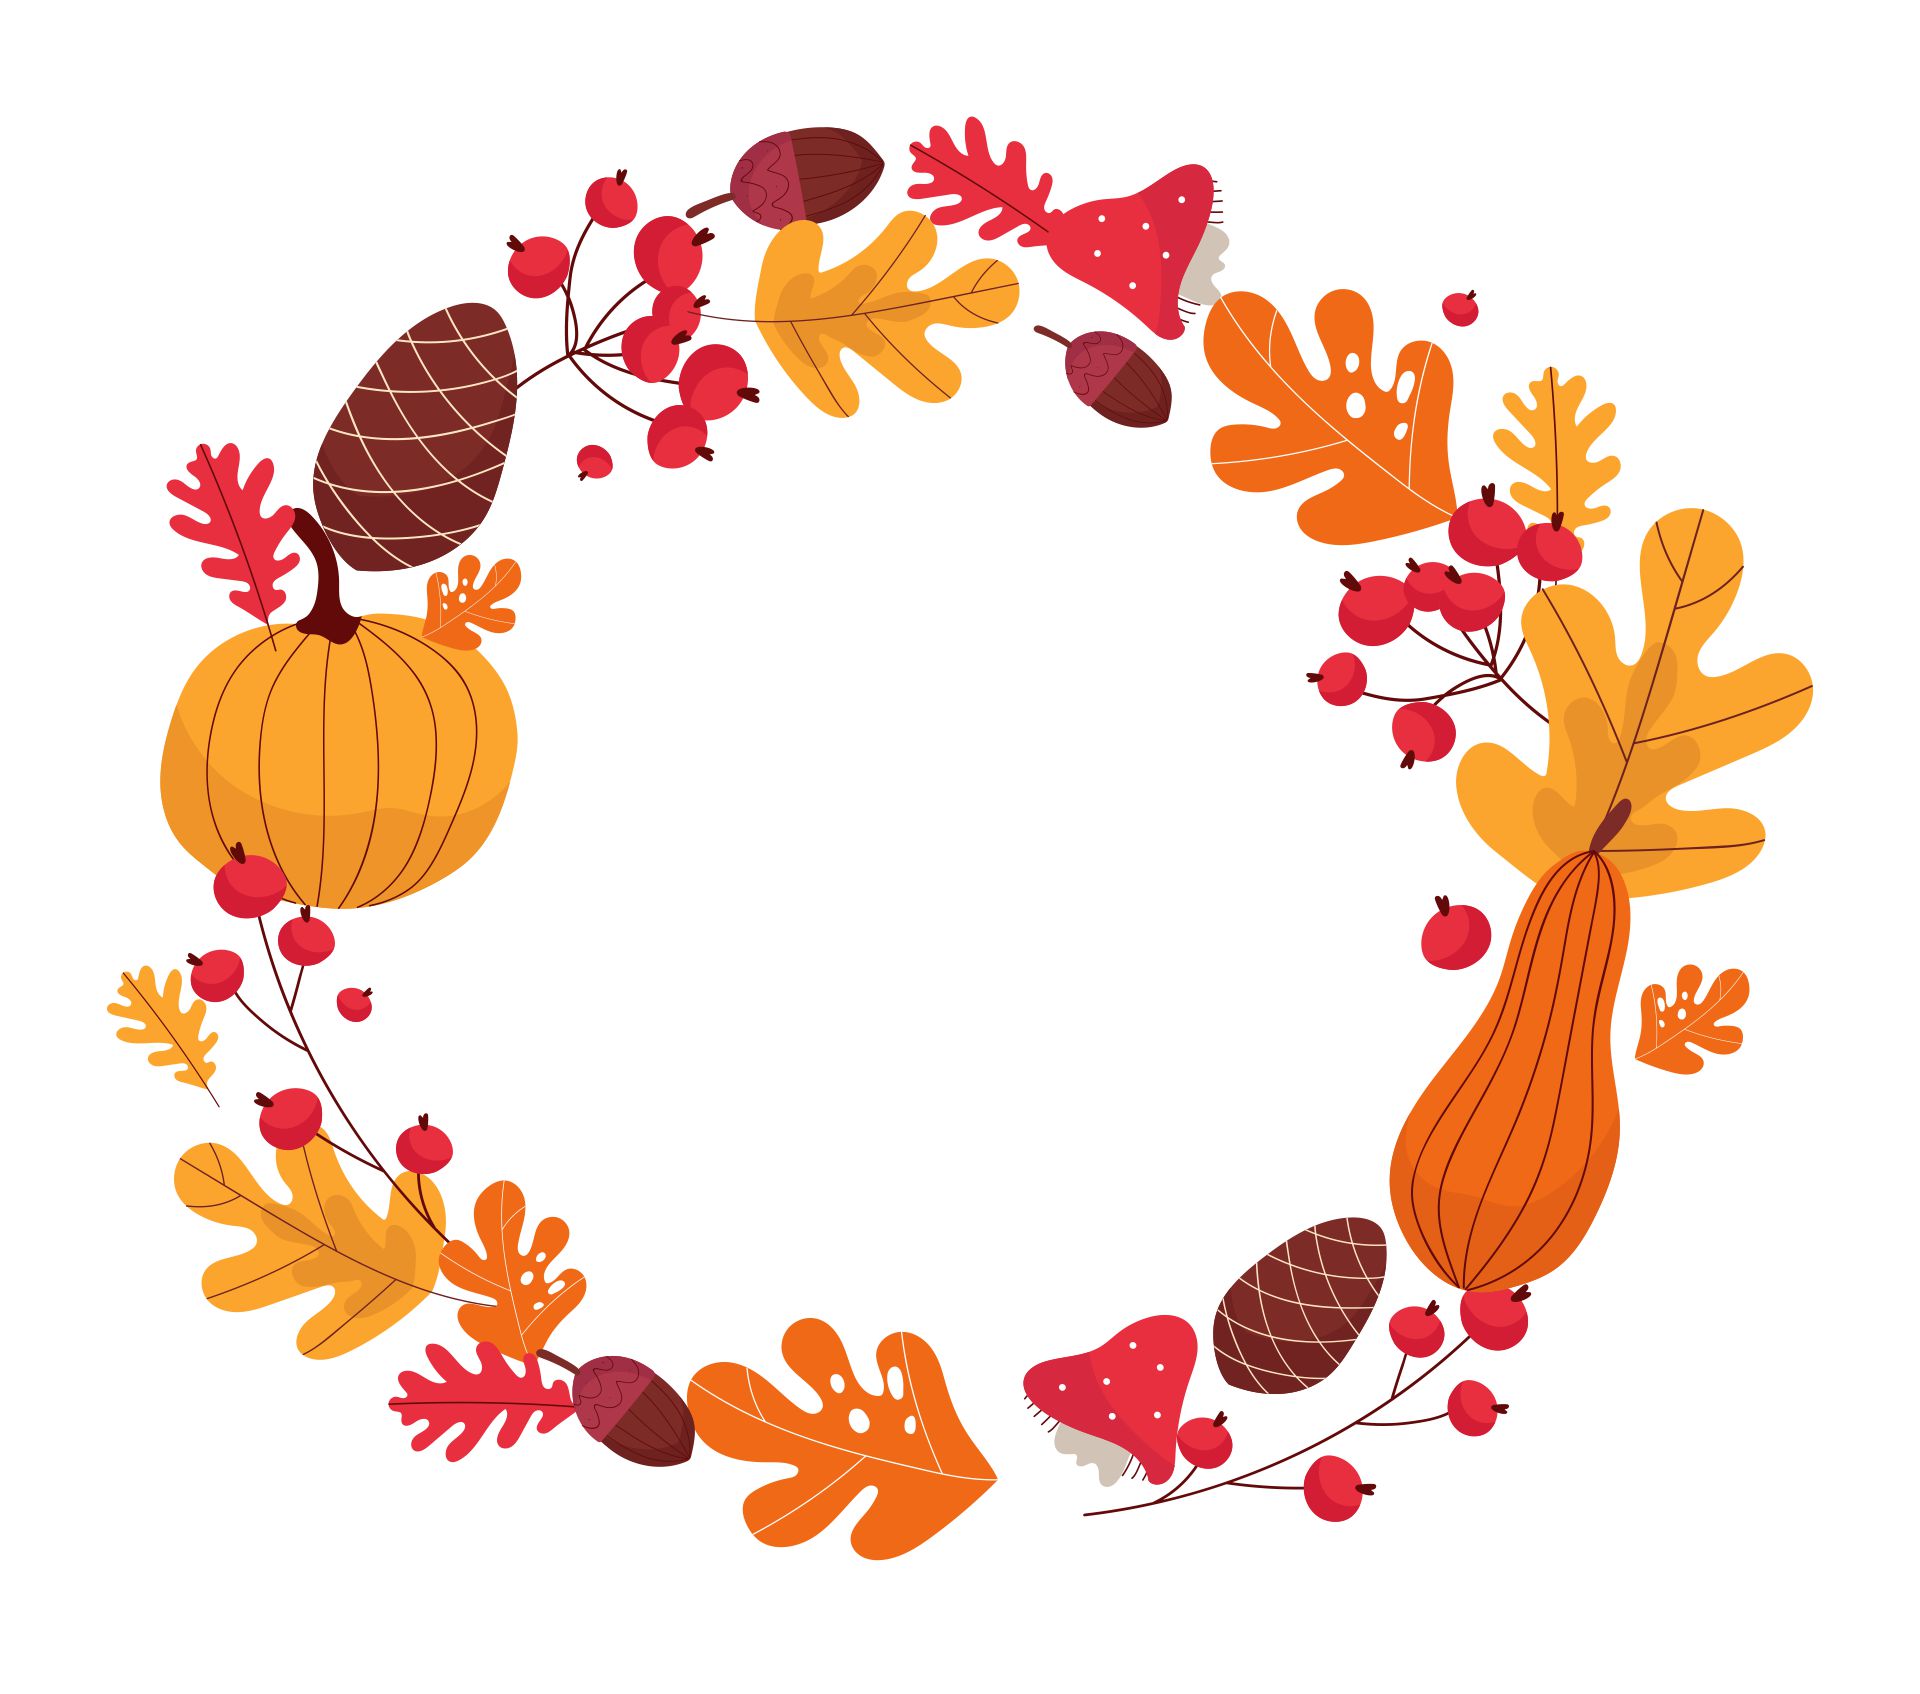 Printable Thanksgiving Card Blank Template With Autumn Branches And Berries Wreath